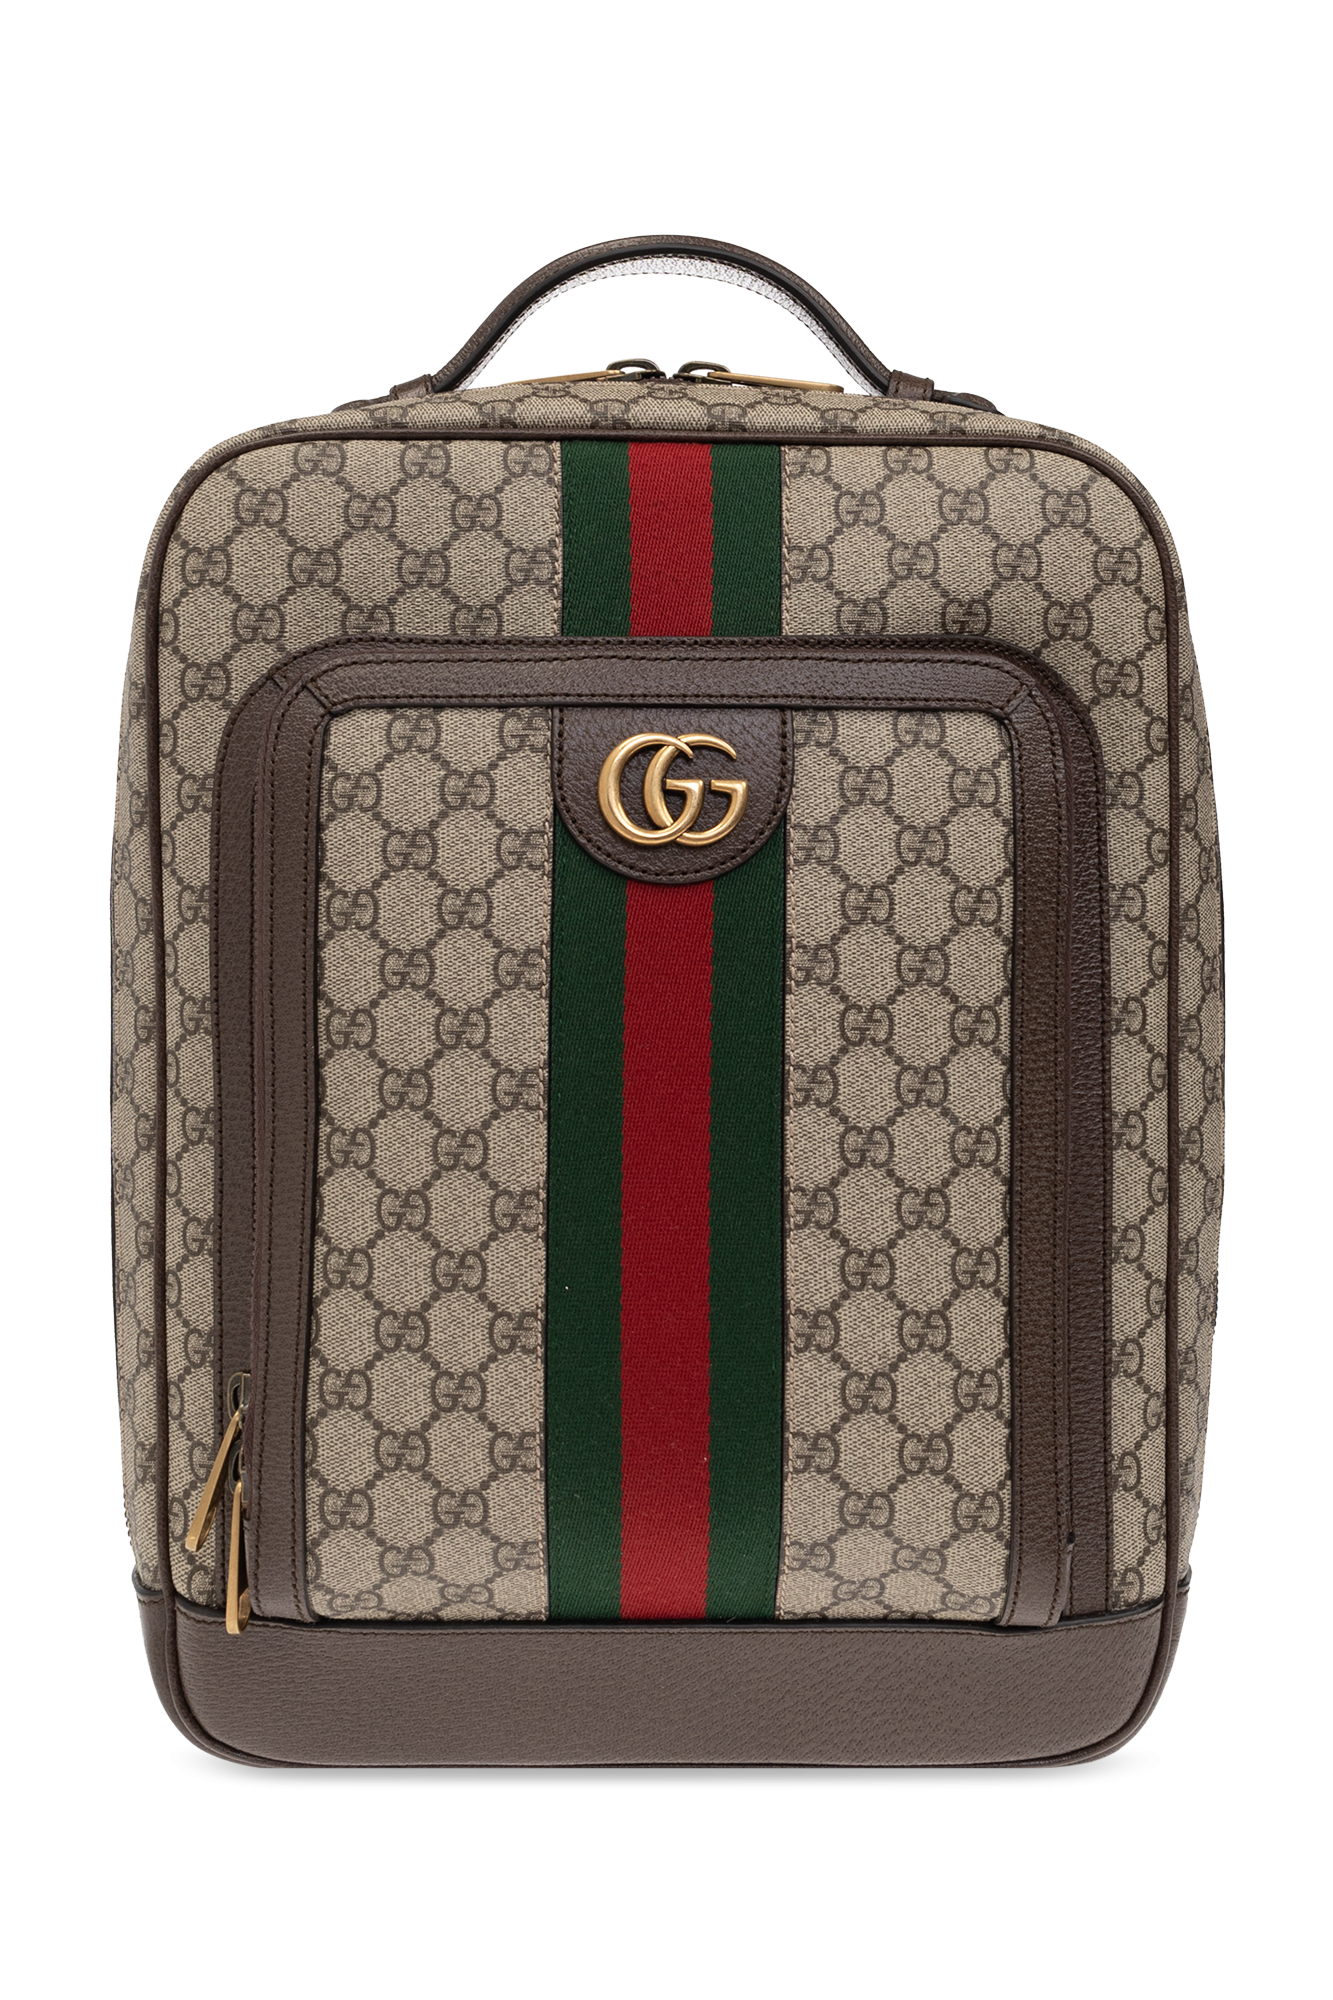 Gucci Backpack for Women  Buy or Sell your GUCCI Backpacks online